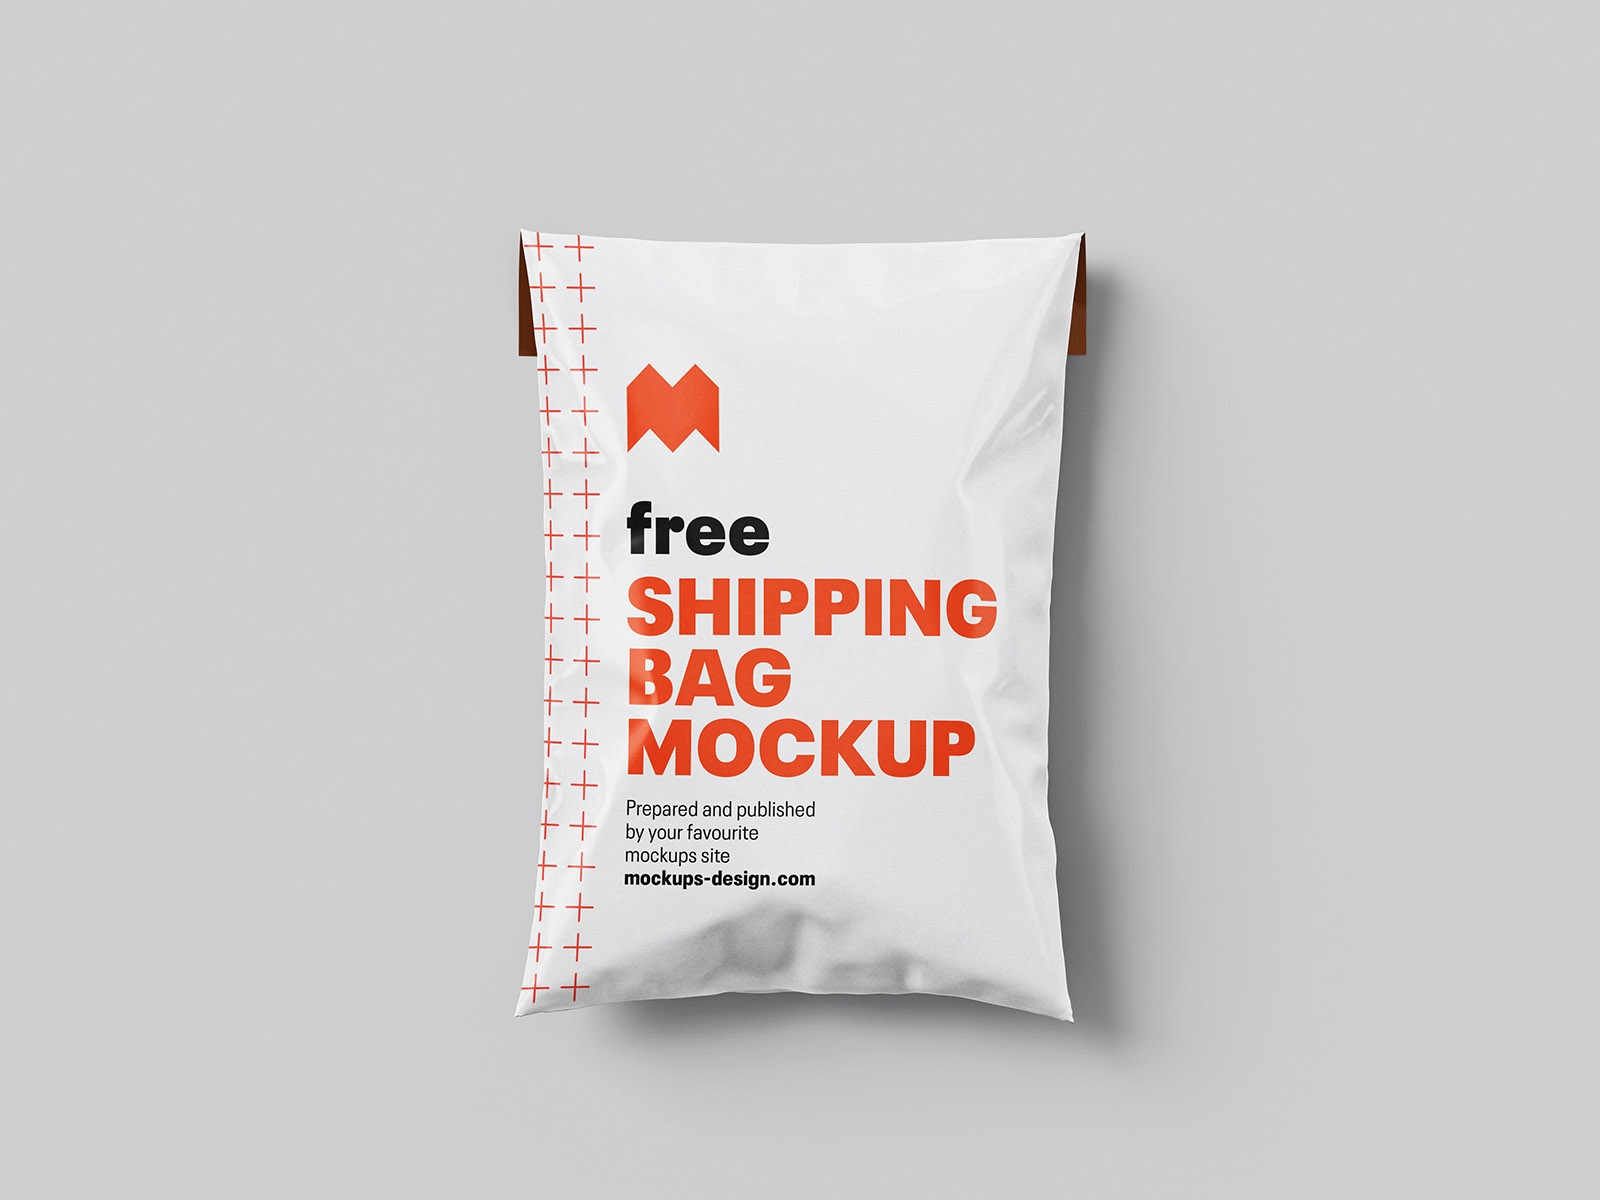 4 Mockups of Shipping Bag in Different Angles FREE PSD